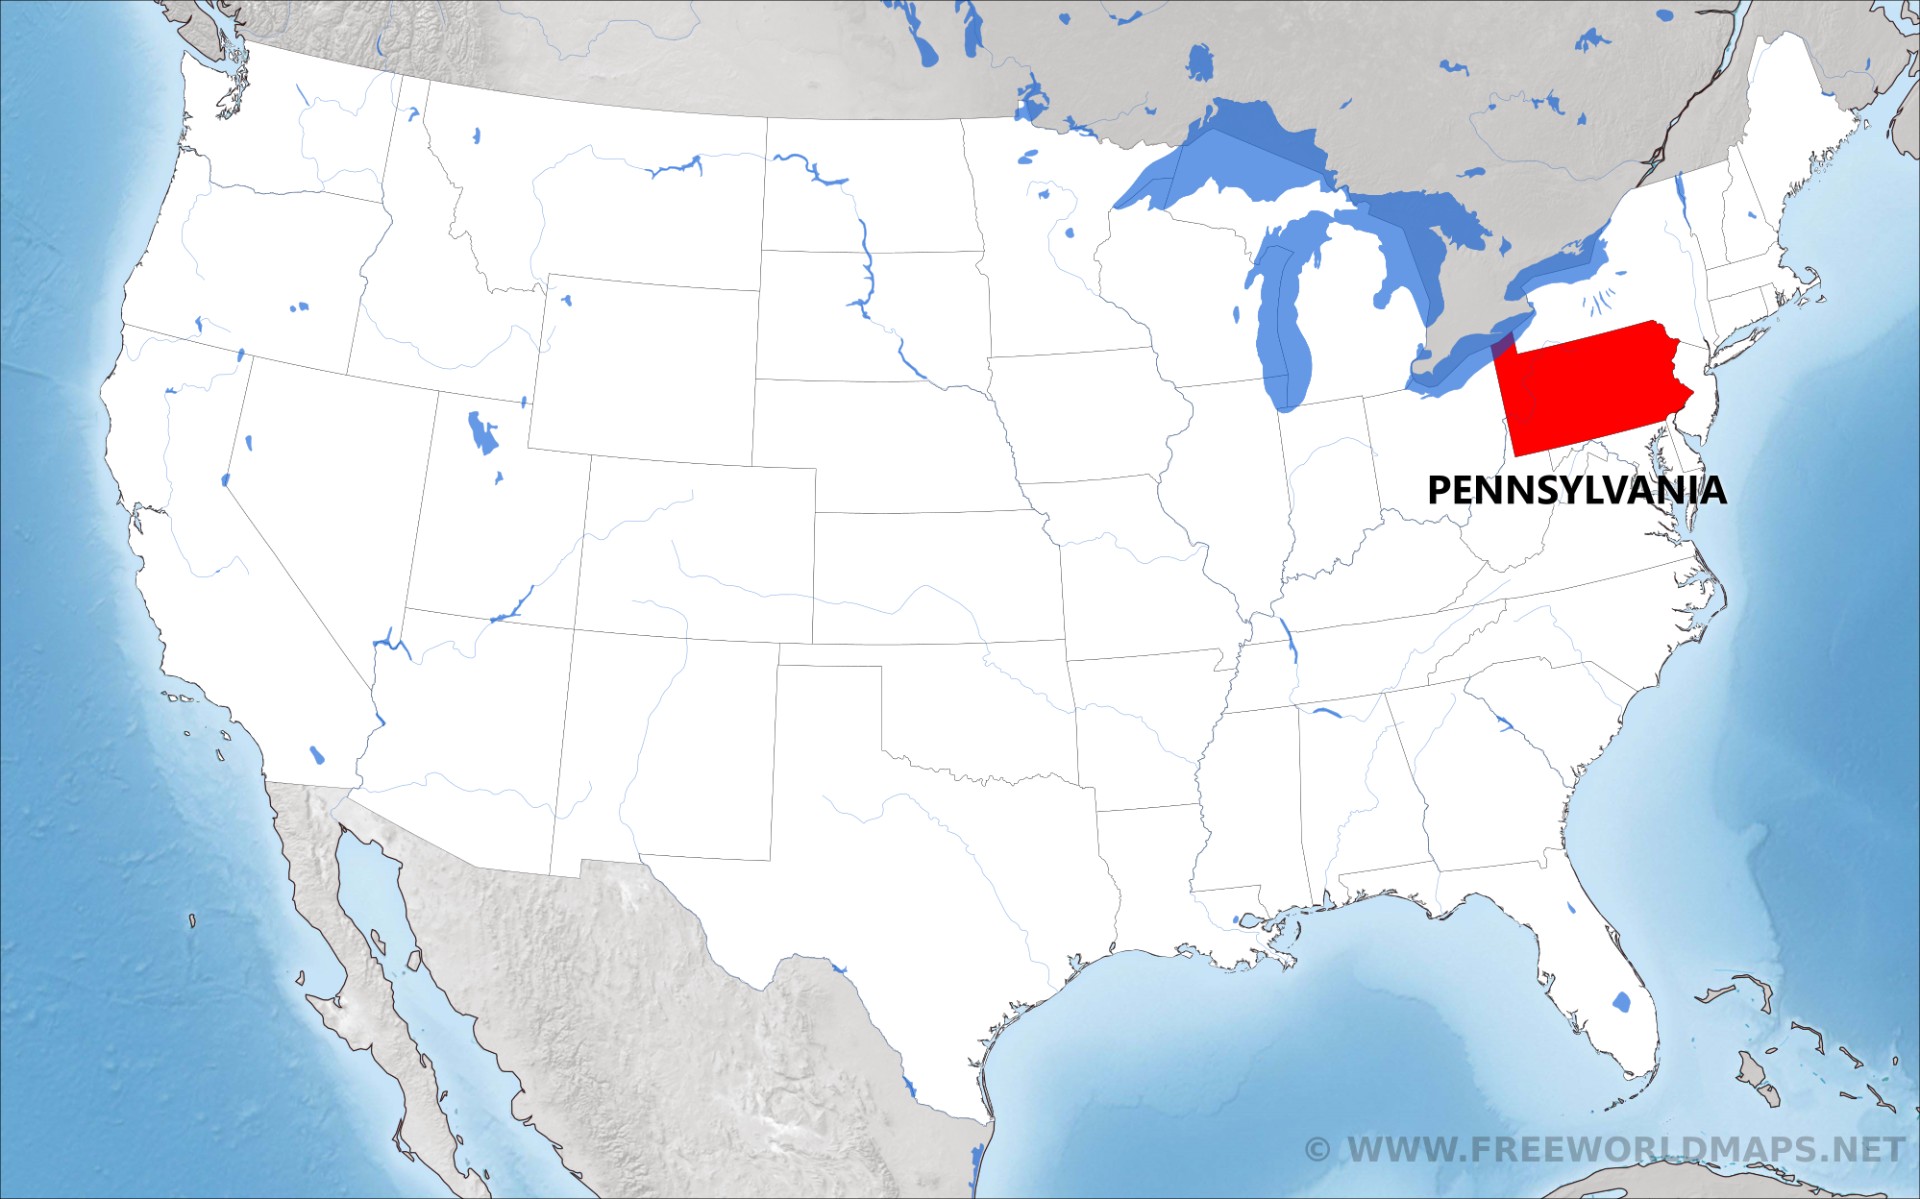 Where is Pennsylvania located on the map?